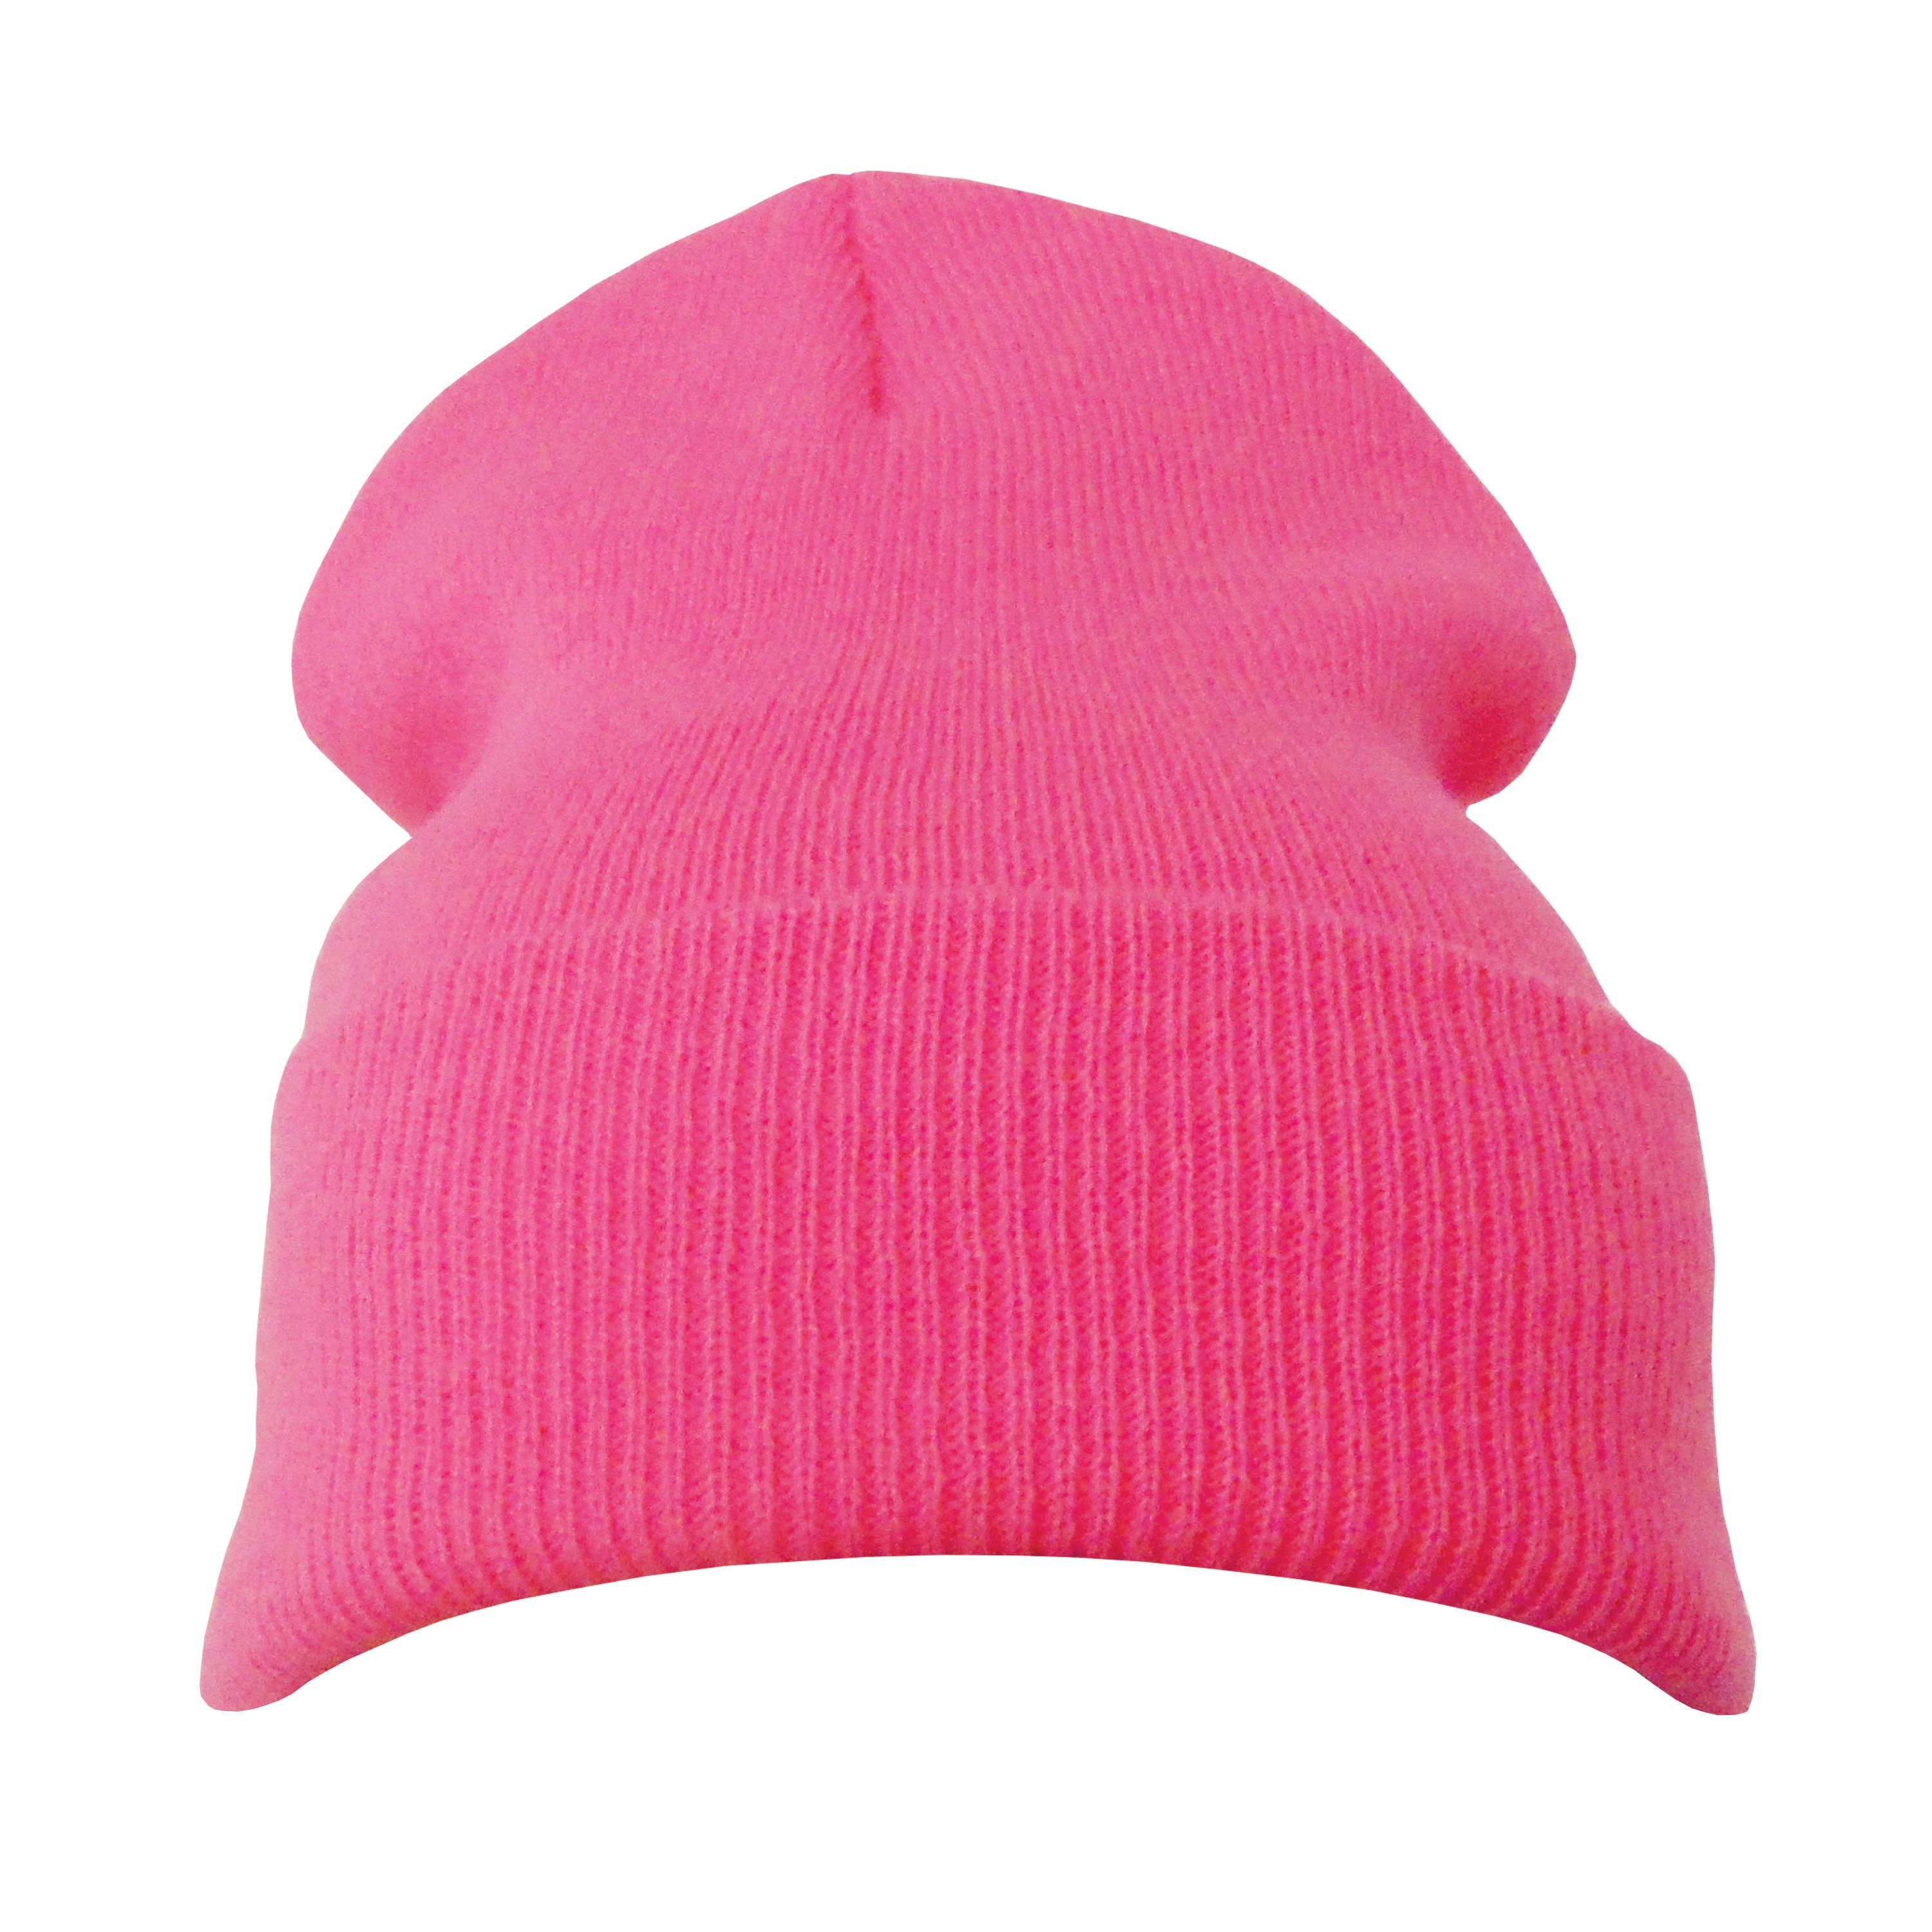 Plain Baby Pink Casual Warm Winter Beanie Hat pack of 1 - Etsy UK